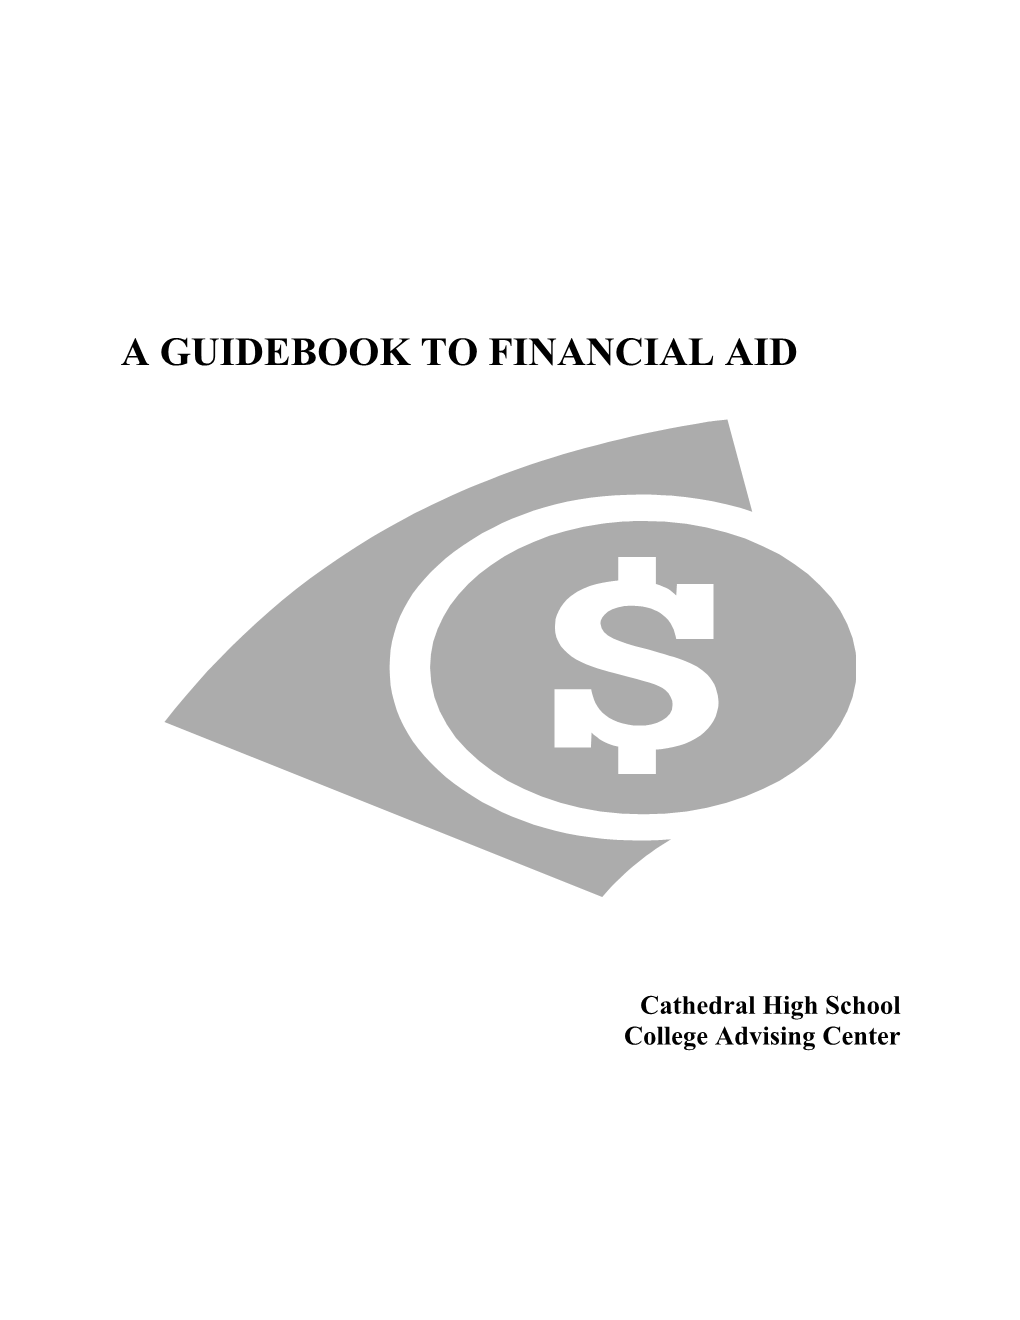 A Guidebook to Financial Aid 2004